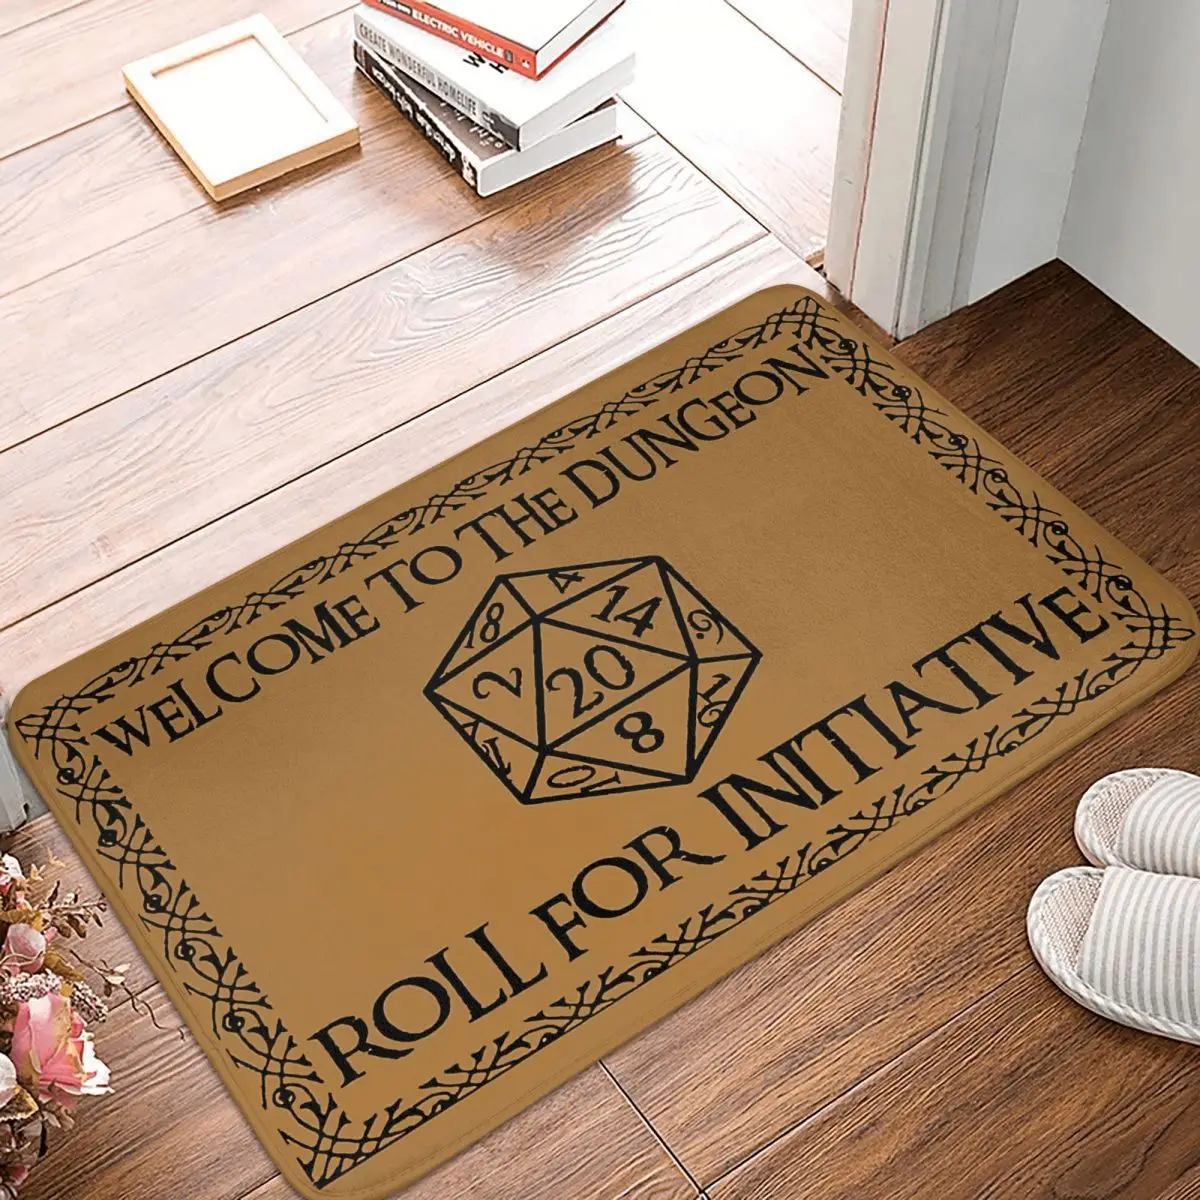 

Dnd Bedroom Mat Welcome To The Dungeons Roll For Initiative Doormat Kitchen Carpet Balcony Rug Home Decor